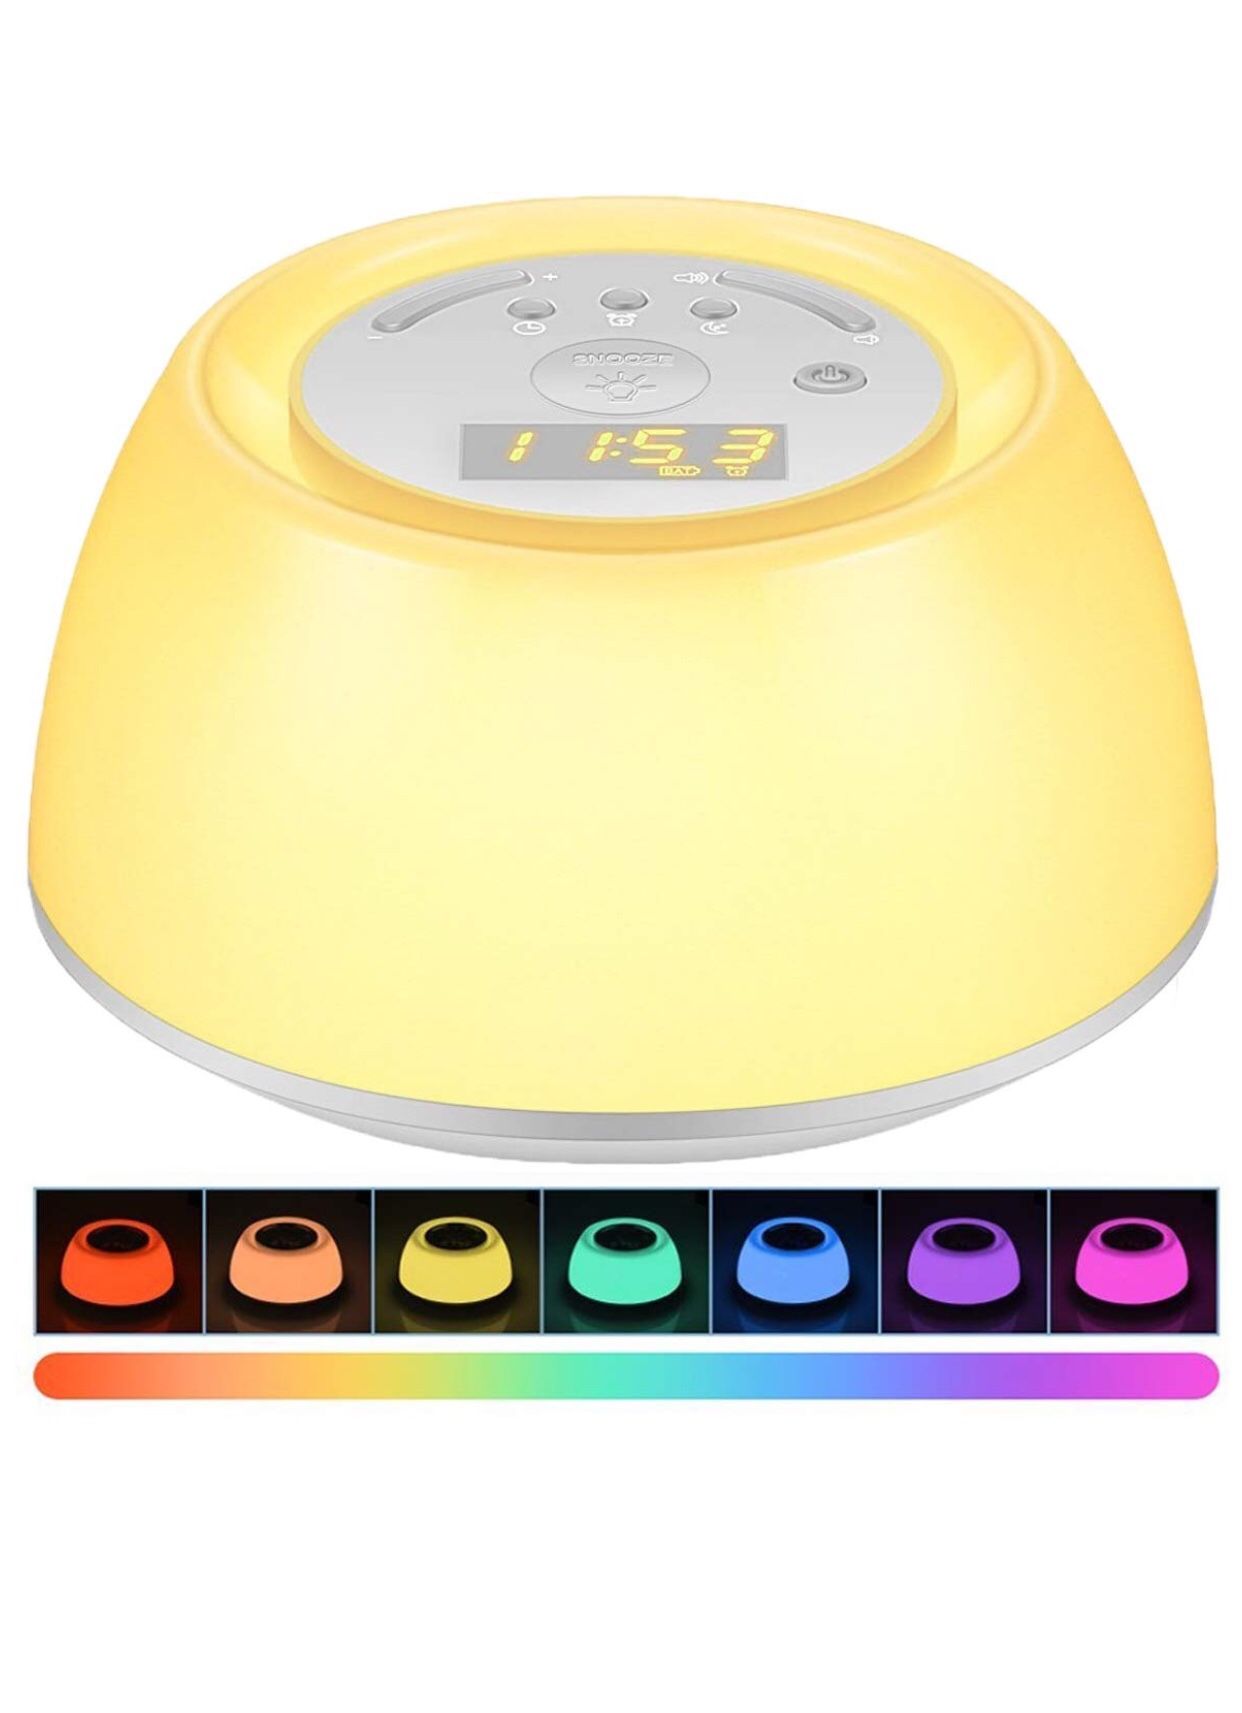 Wake up light alarm clock, sleep aid bedside lamp with sunrise snooze function, 8 natural sounds, 3 levels of brightness, multiple color variations f